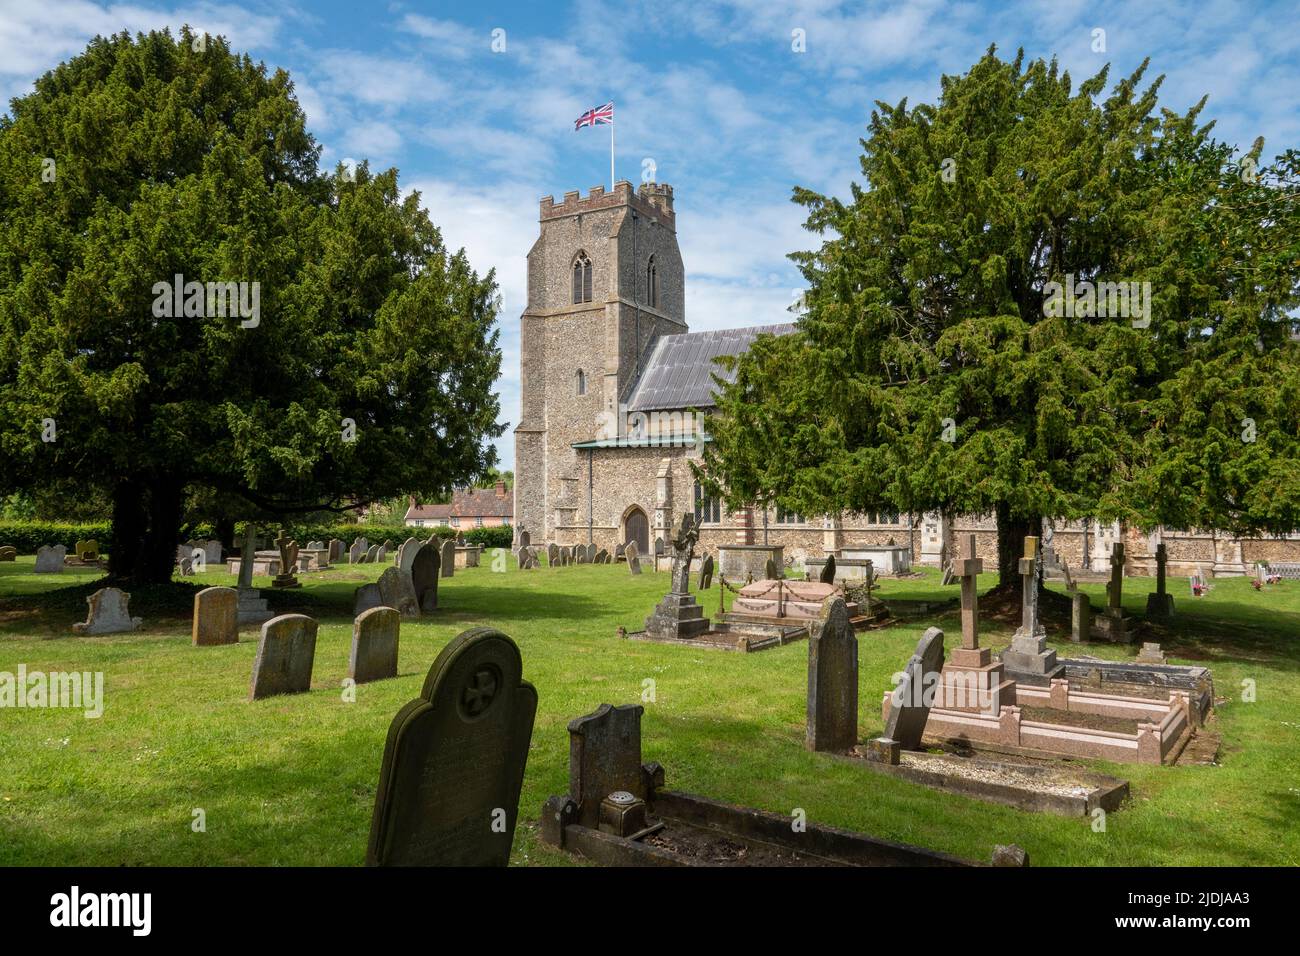 General view with churchyard and trees in the foreground, St Mary 's Church Dennington, Suffolk Stock Photo